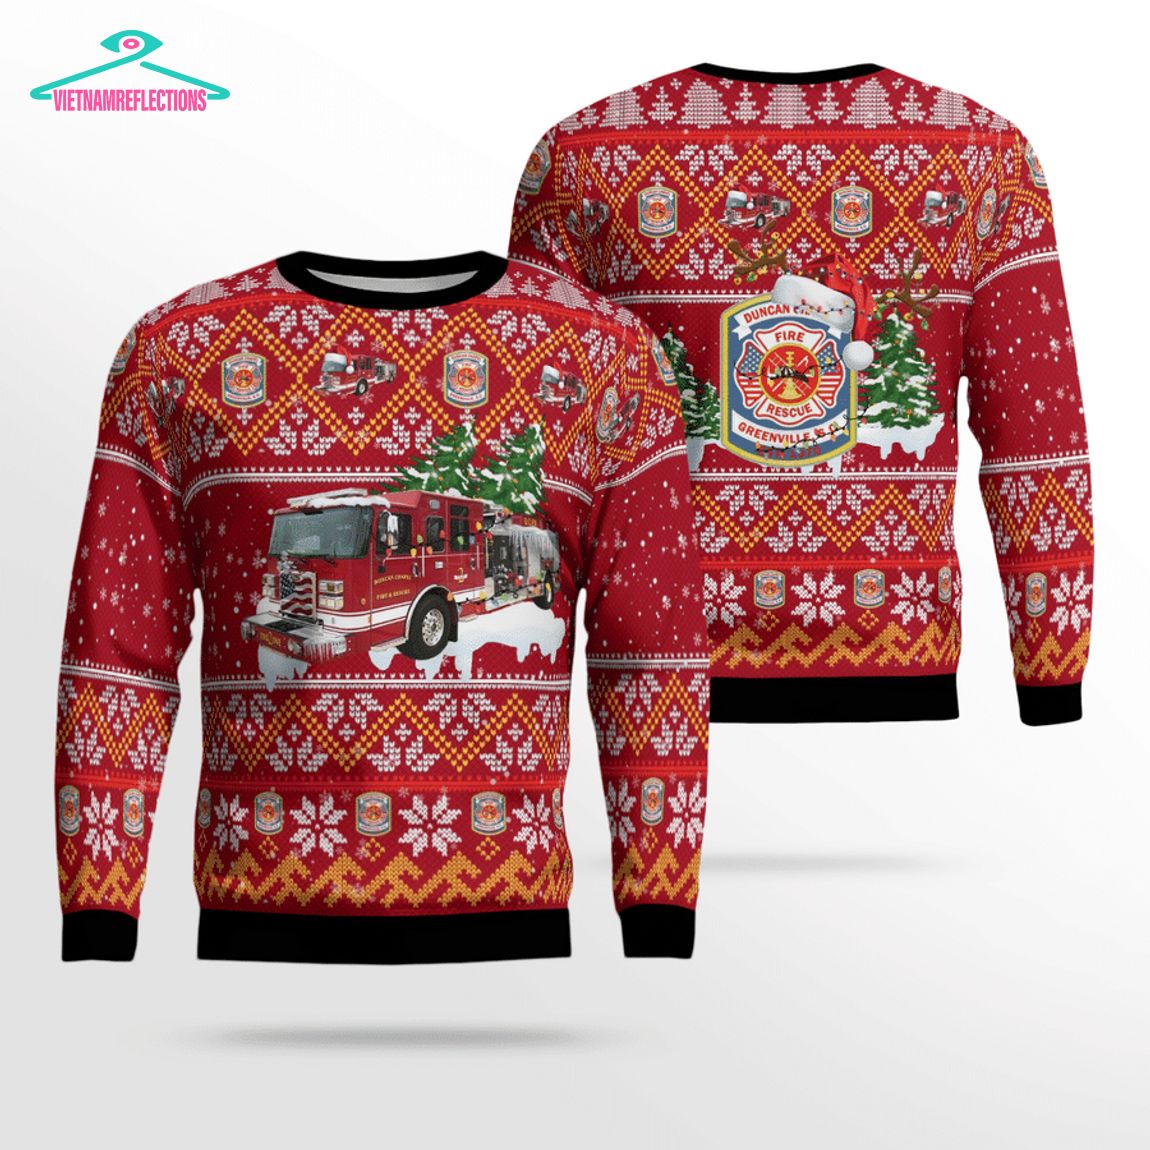 Duncan Chapel Fire District 3D Christmas Sweater - Have you joined a gymnasium?